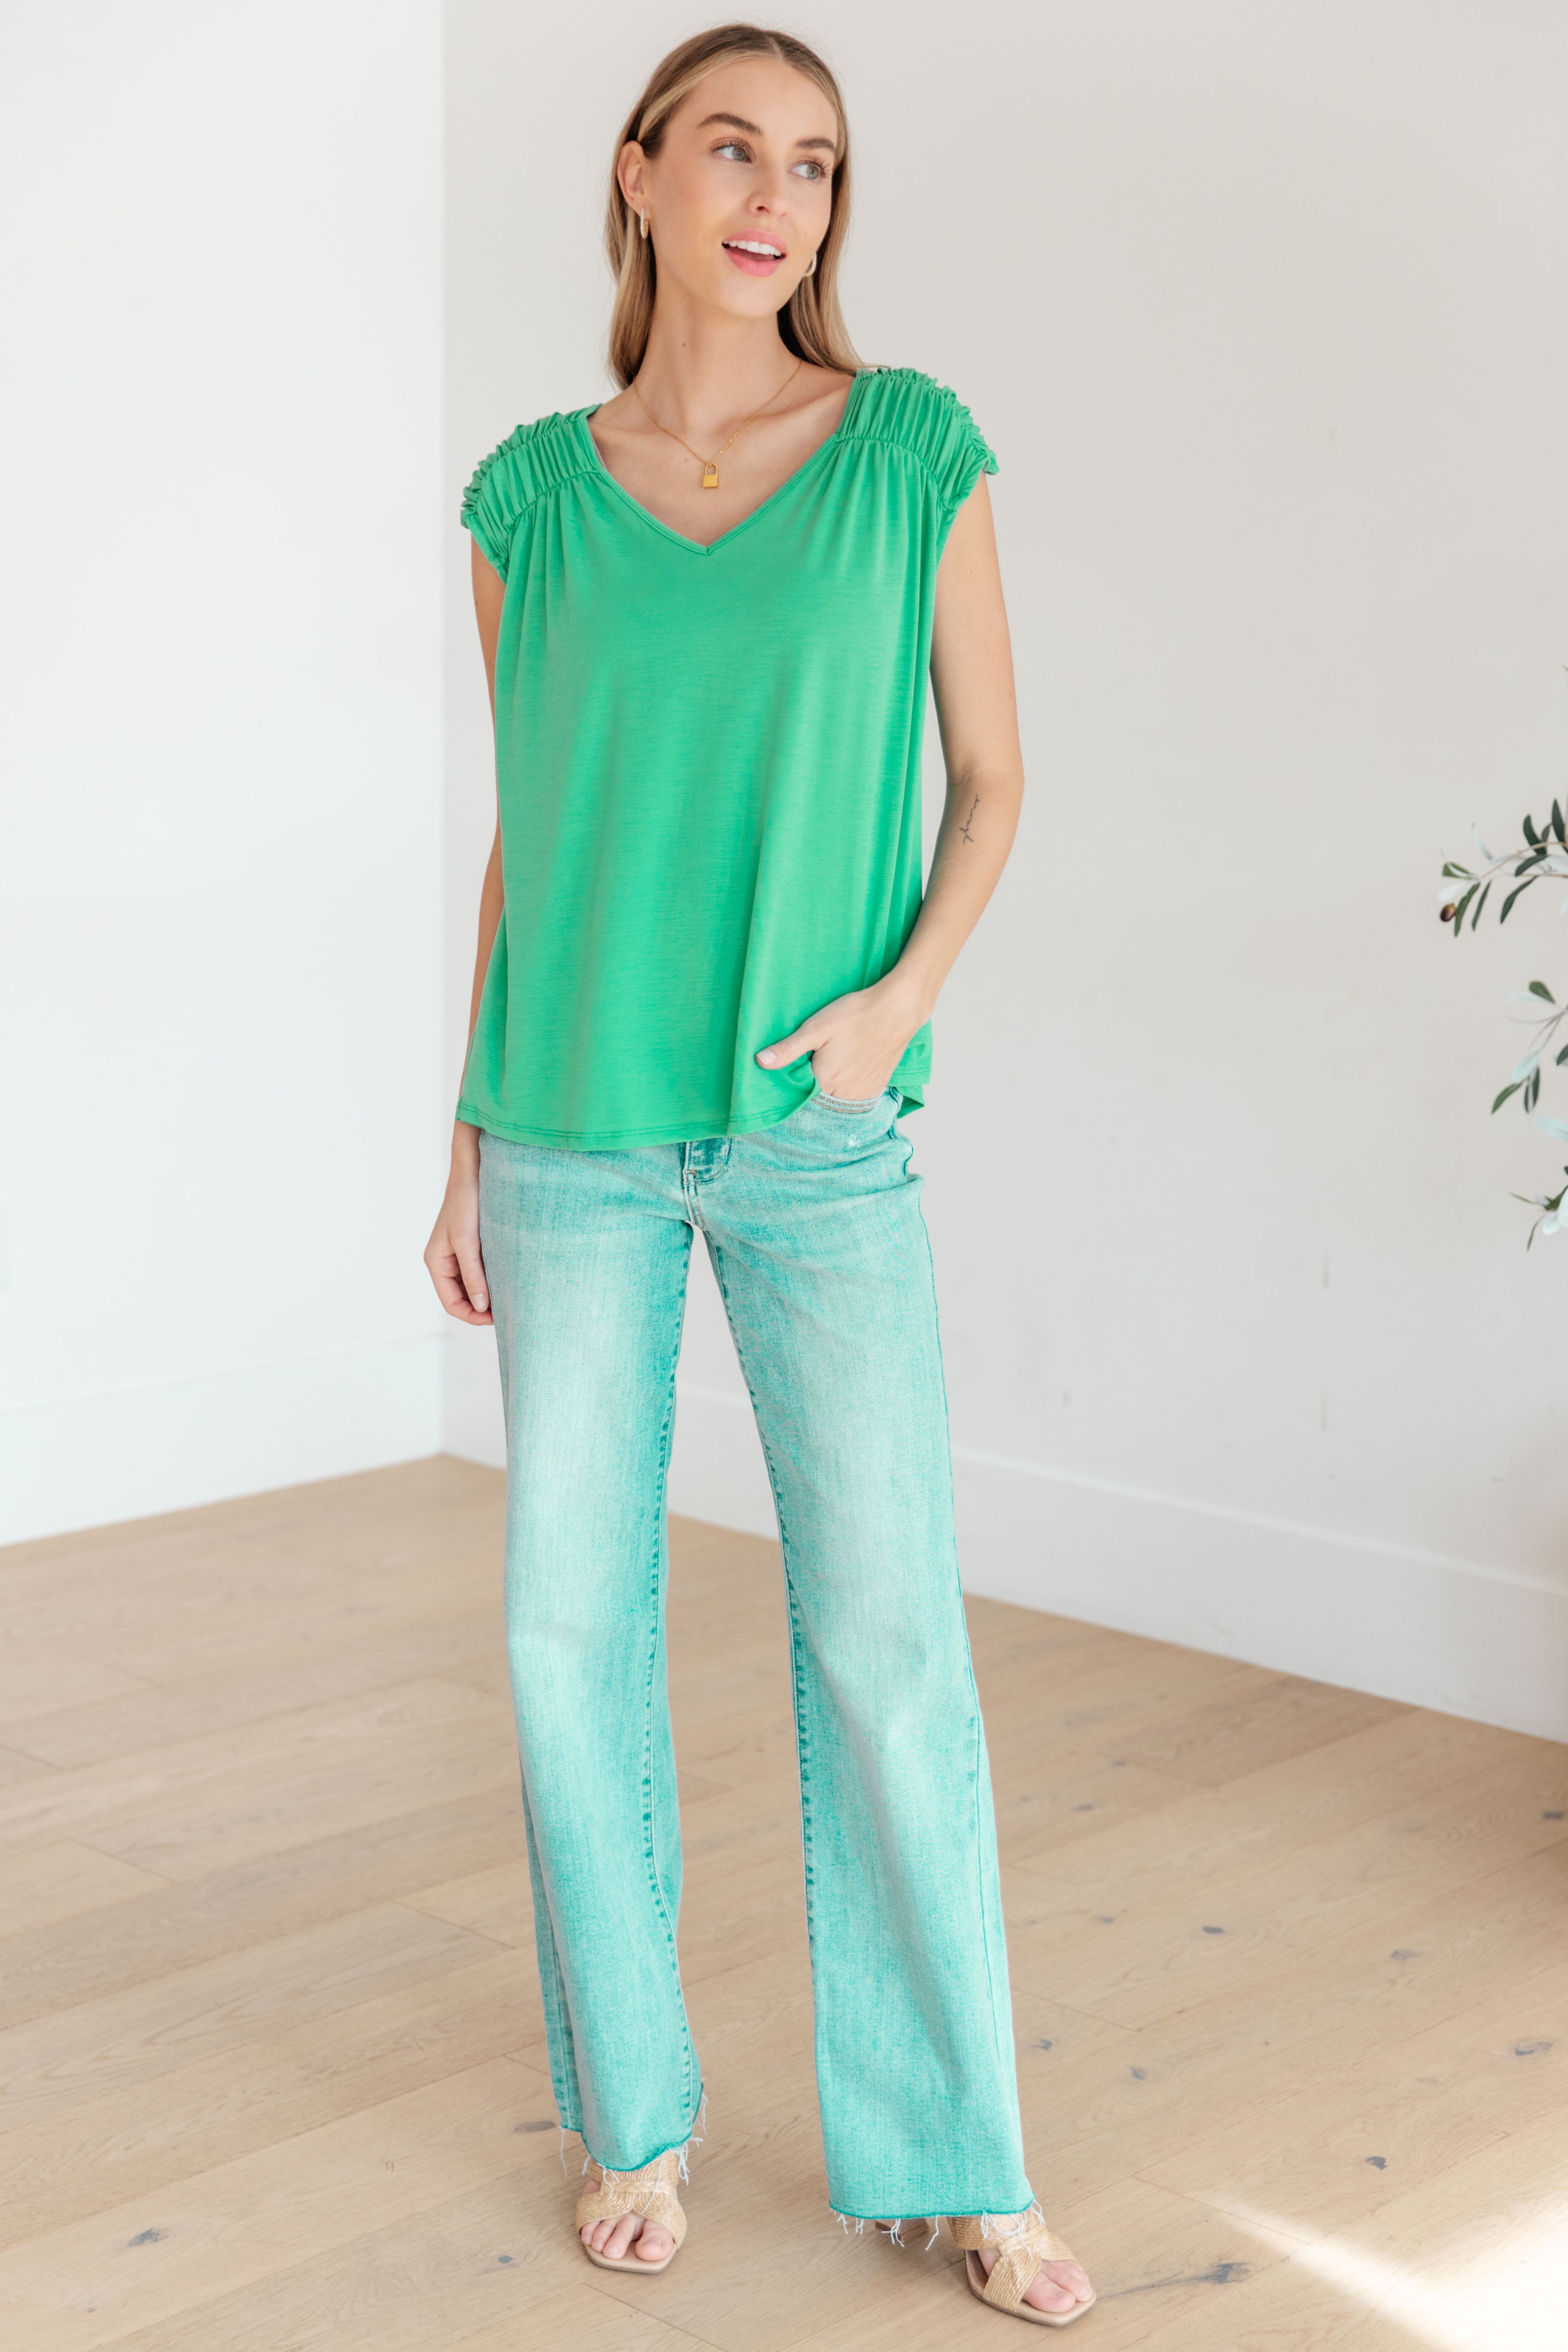 Ruched Cap Sleeve Top in Emerald-Short Sleeve Tops-Krush Kandy, Women's Online Fashion Boutique Located in Phoenix, Arizona (Scottsdale Area)